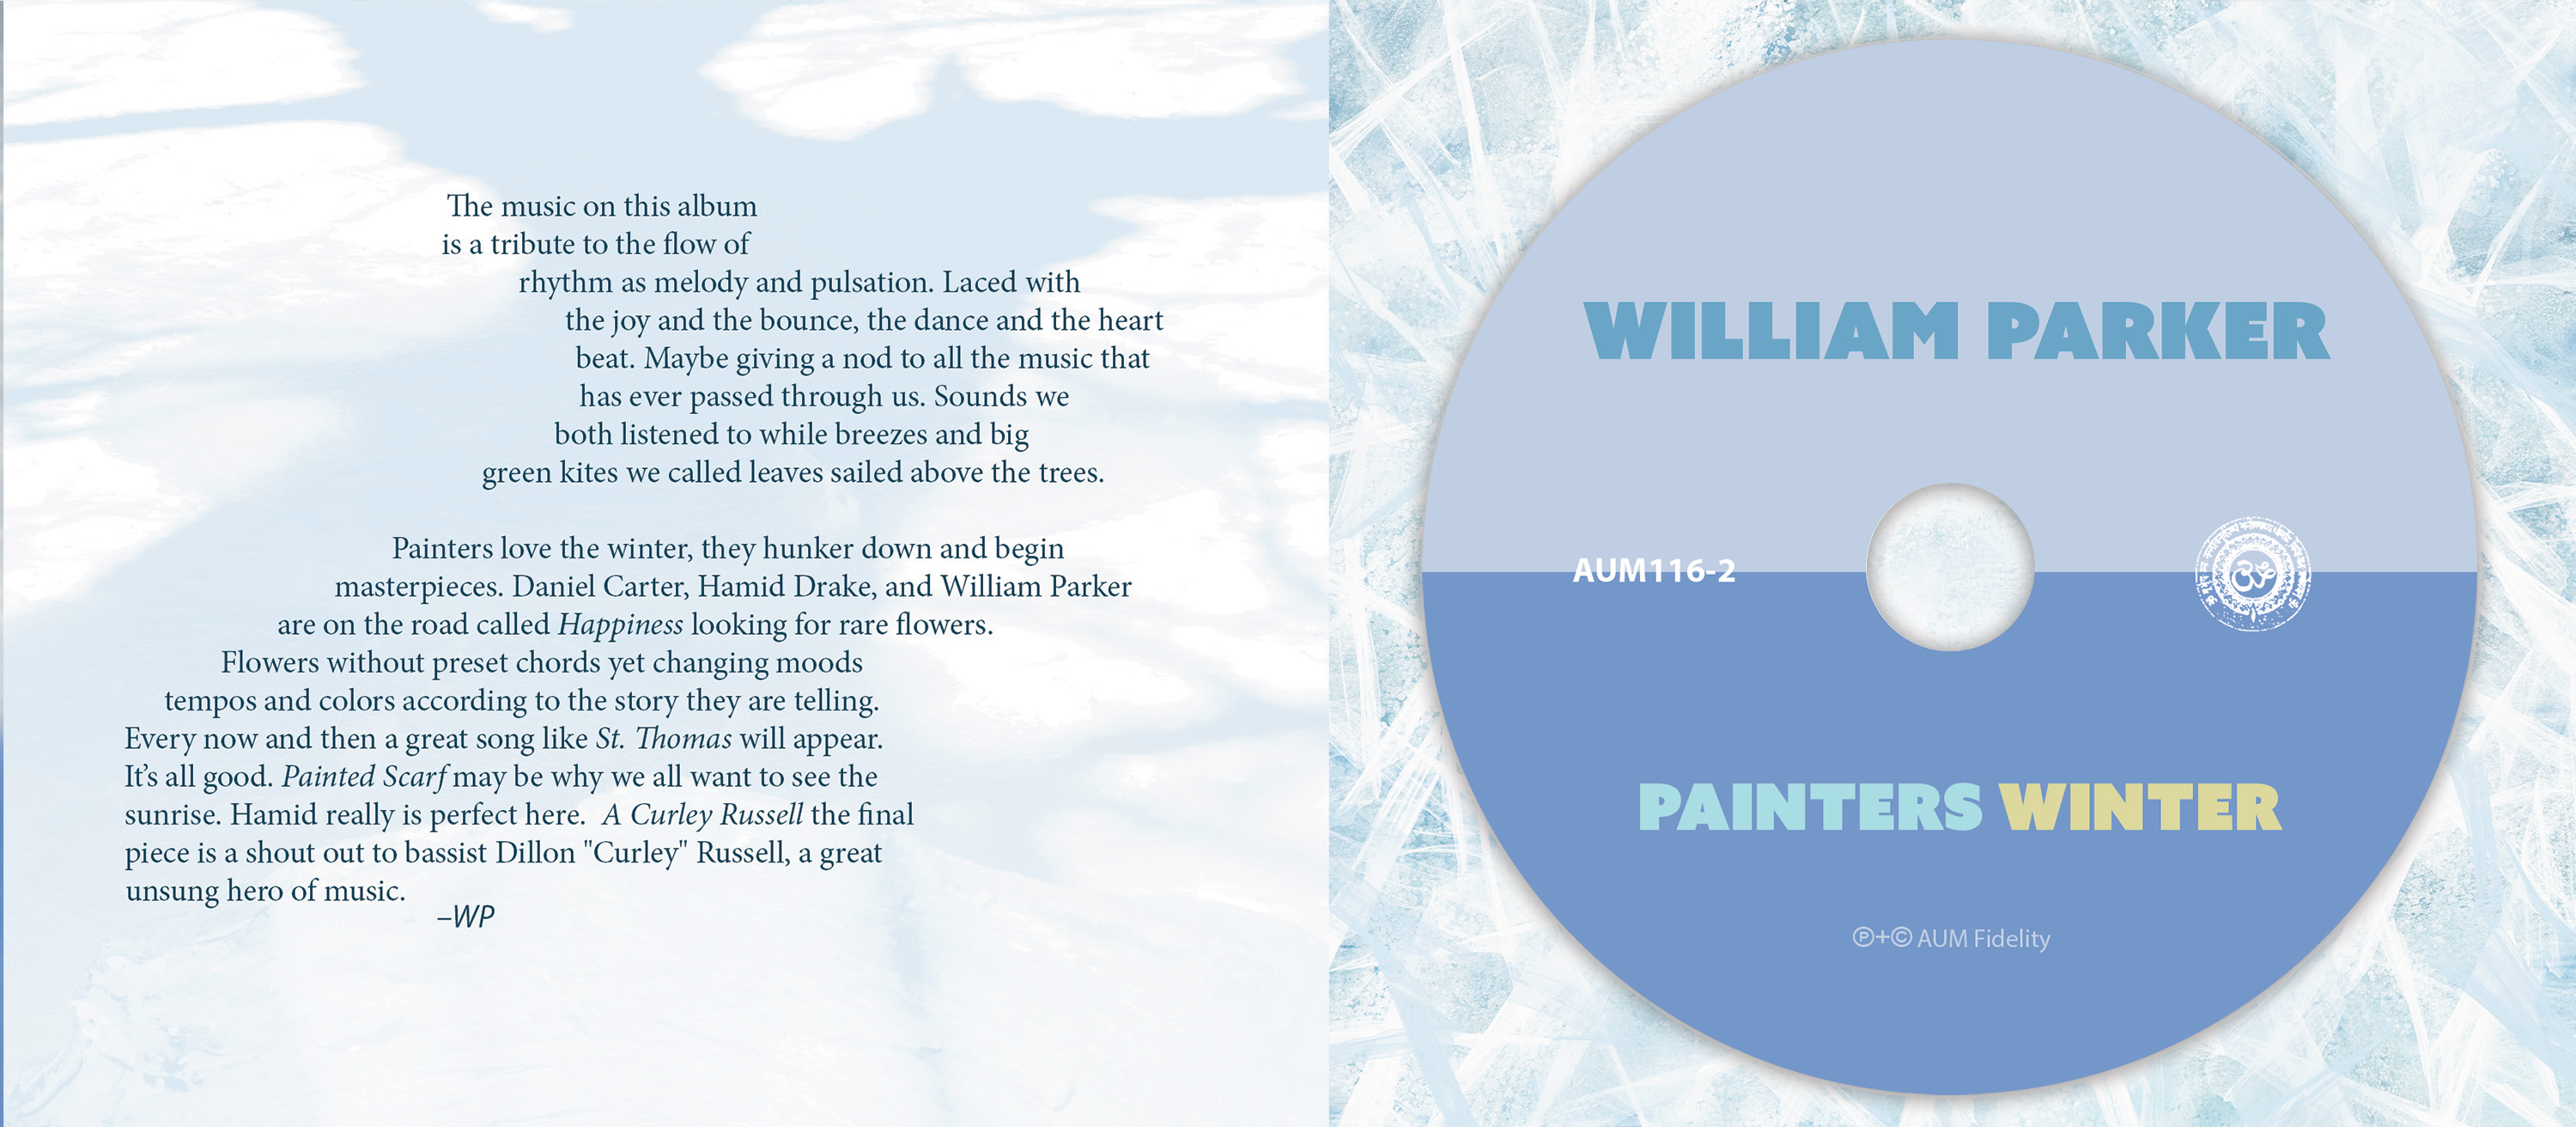 cd cd inside spread with cd in place for Painters Winter by William Parker